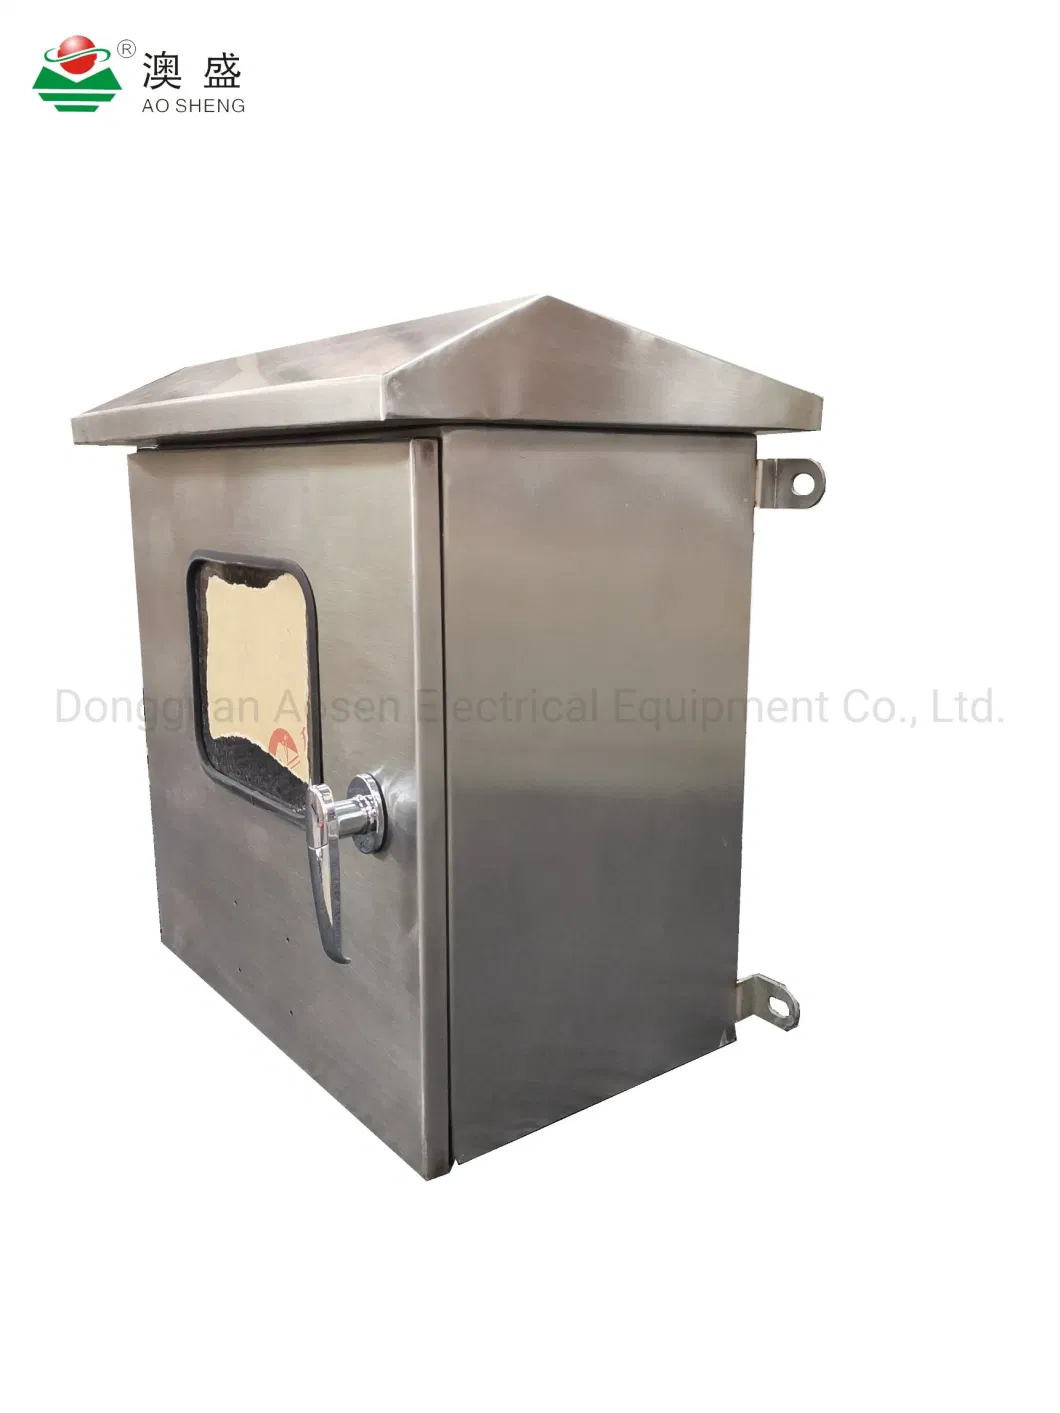 Outdoor IP65 Stainless Steel Enclosure Electrical Enclosure